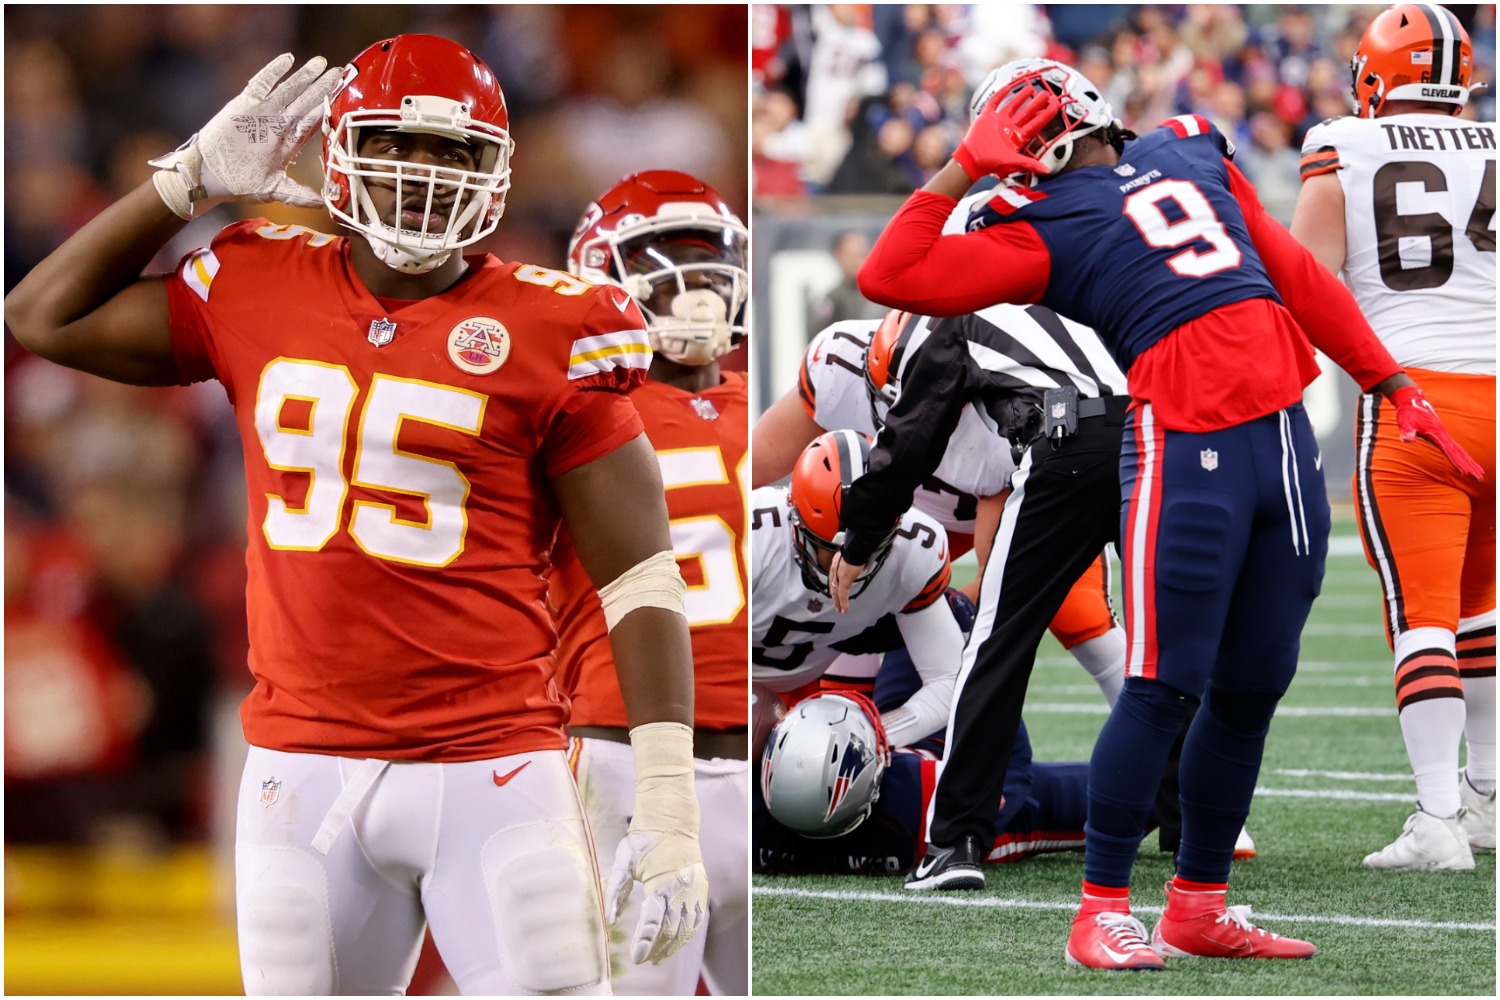 Kansas City Chiefs DL Chris Jones signals to the crowd as New England Patriots outside linebacker Matthew Judon celebrates recording a sack against the Cleveland Browns.